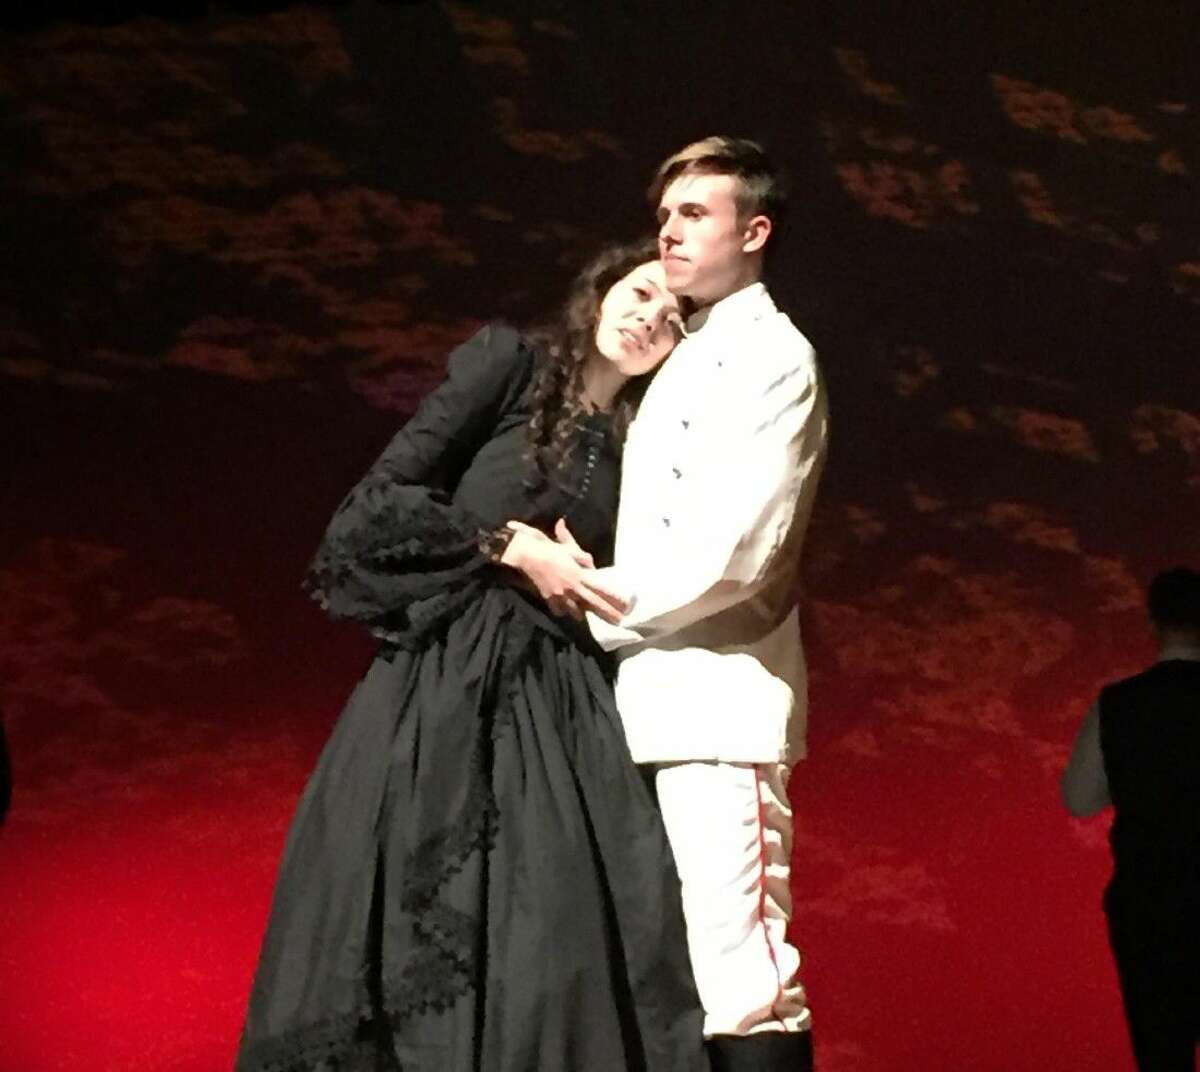 Malerie Dozier and Jack Russell portray Anna Karenina and Count Vronski in Montgomery High School’s production of “Anna Karenina.” Dozier got the state’s top honor as best actress and Russell was placed in the statewide all-star cast for the 2015-2016 school year in the 6A UIL One Act Play competition.